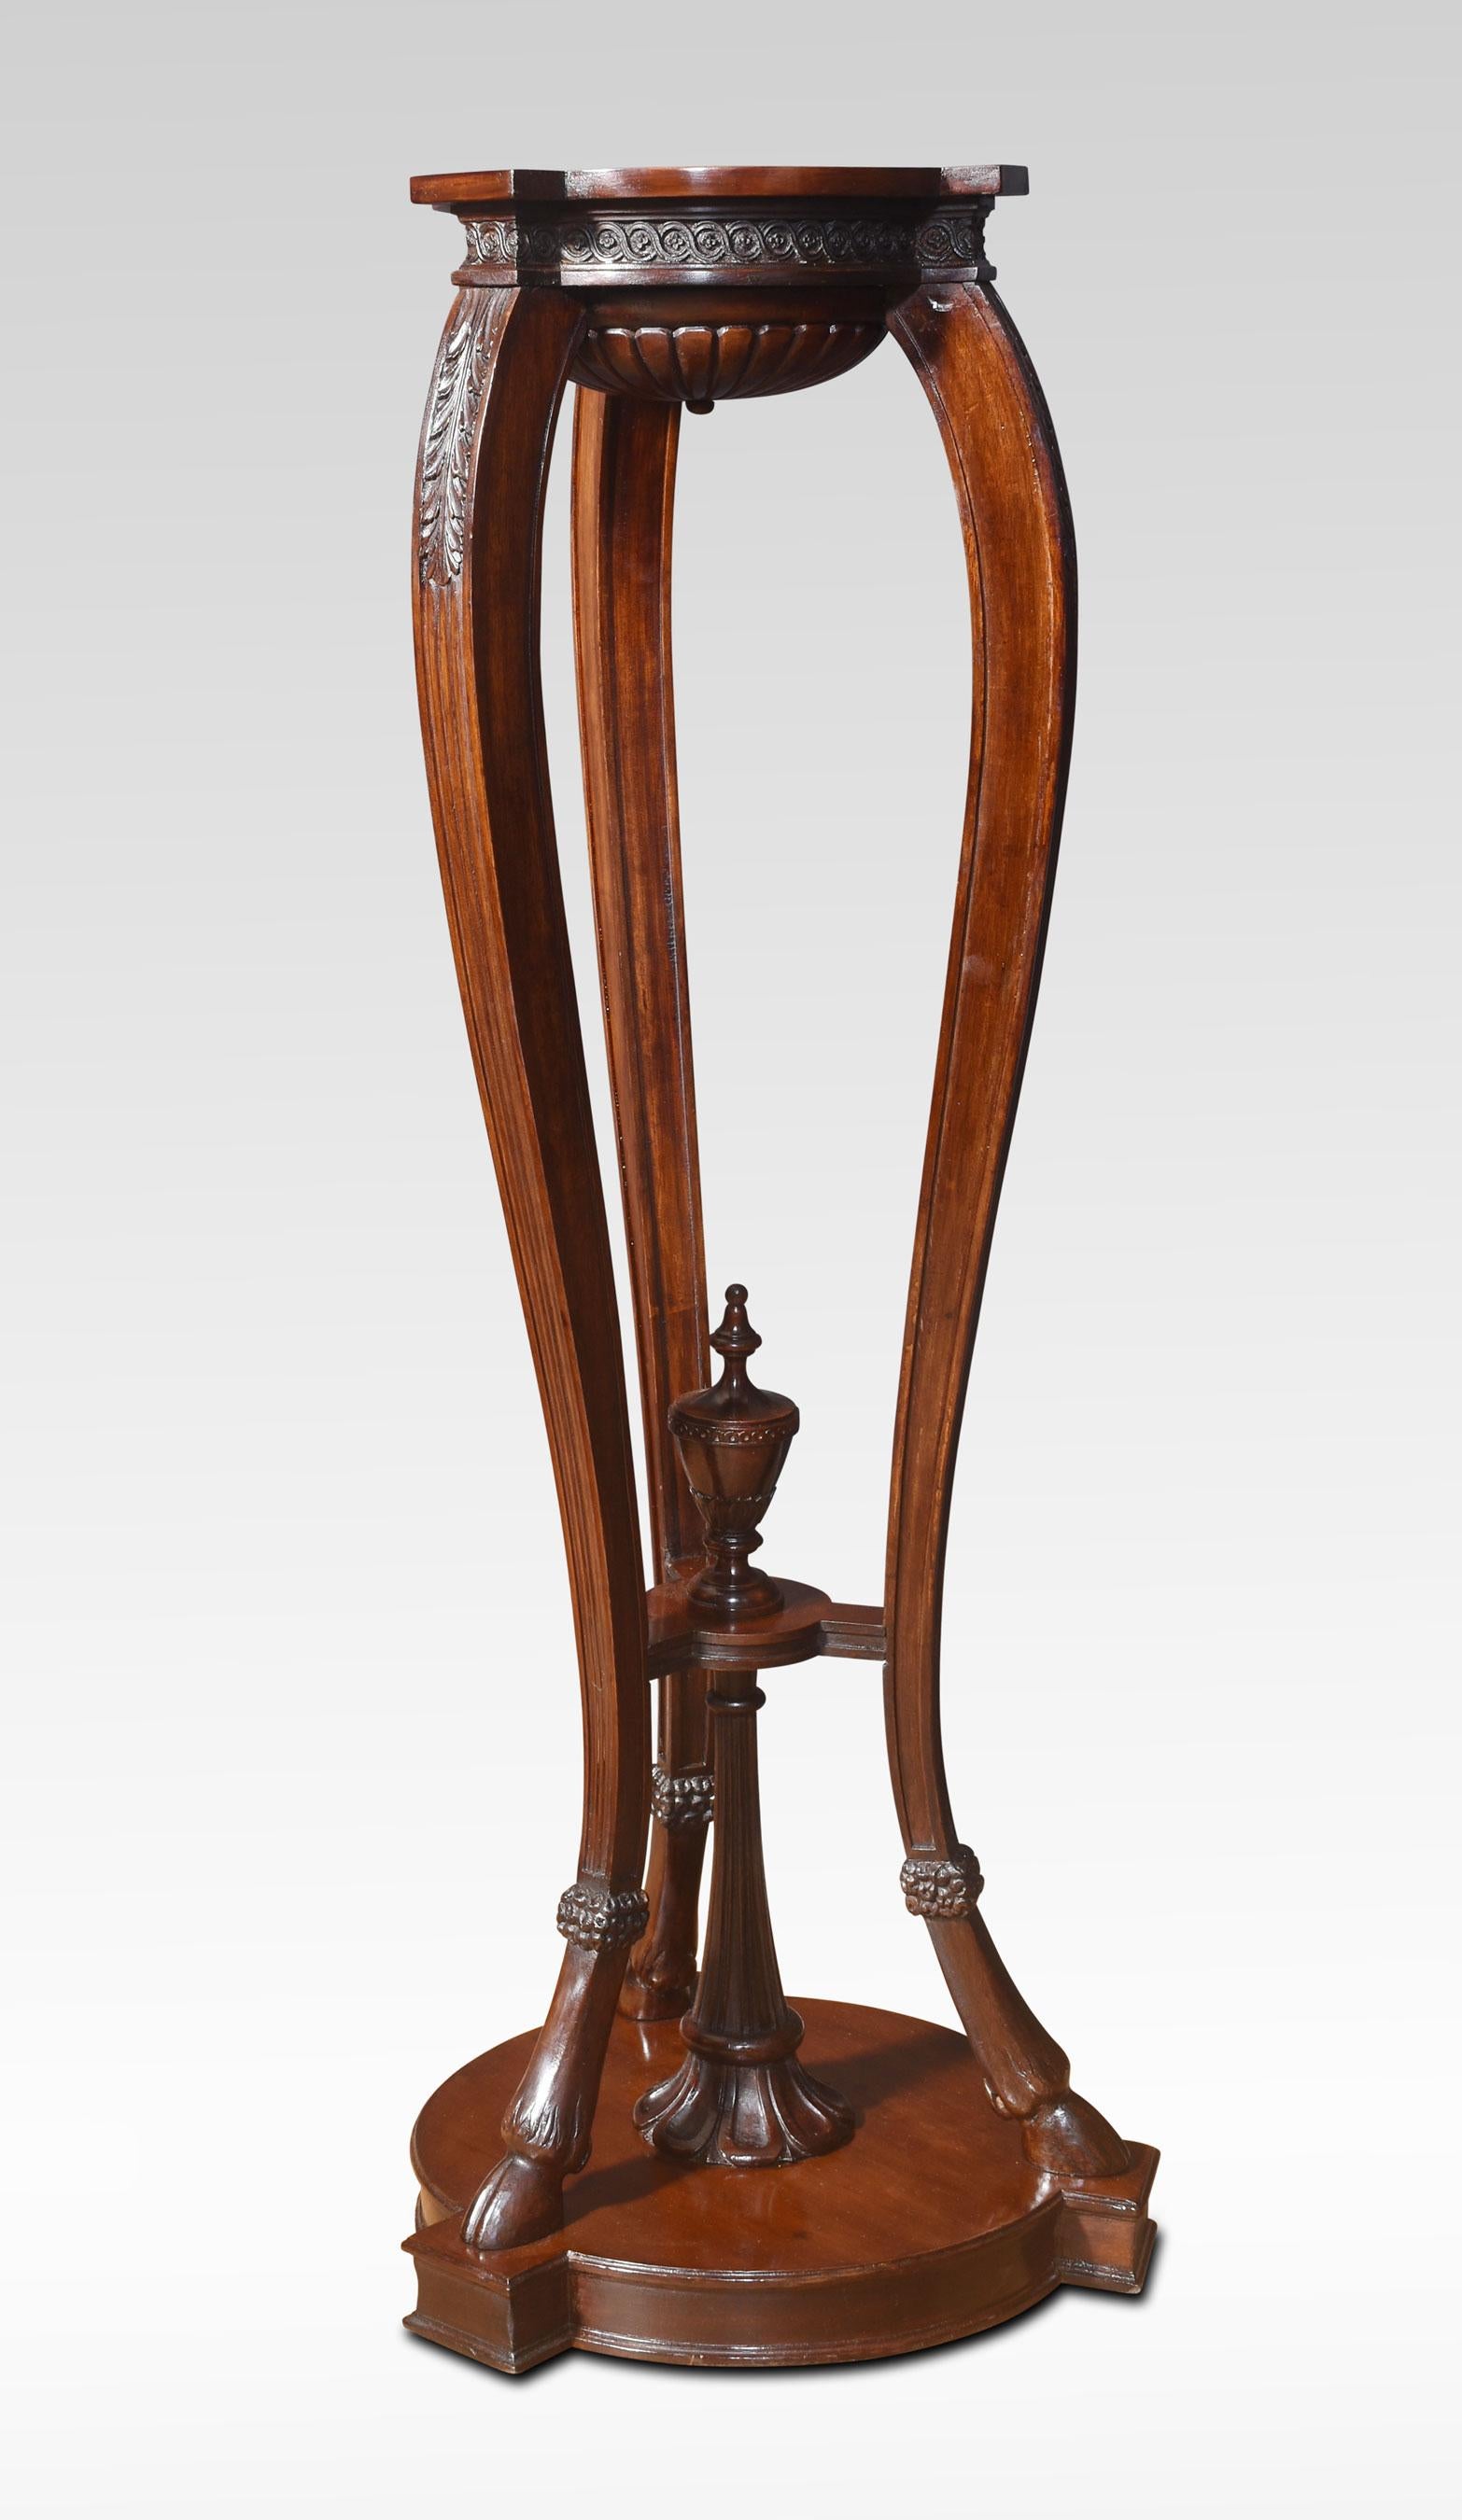 Pair of Neo classical style carved mahogany torcheres the shaped tops and carved frieze with guilloche and acanthus leaves detail. To the shaped legs united by under-tier with central urn. All raised up on Hoof feet and moulded